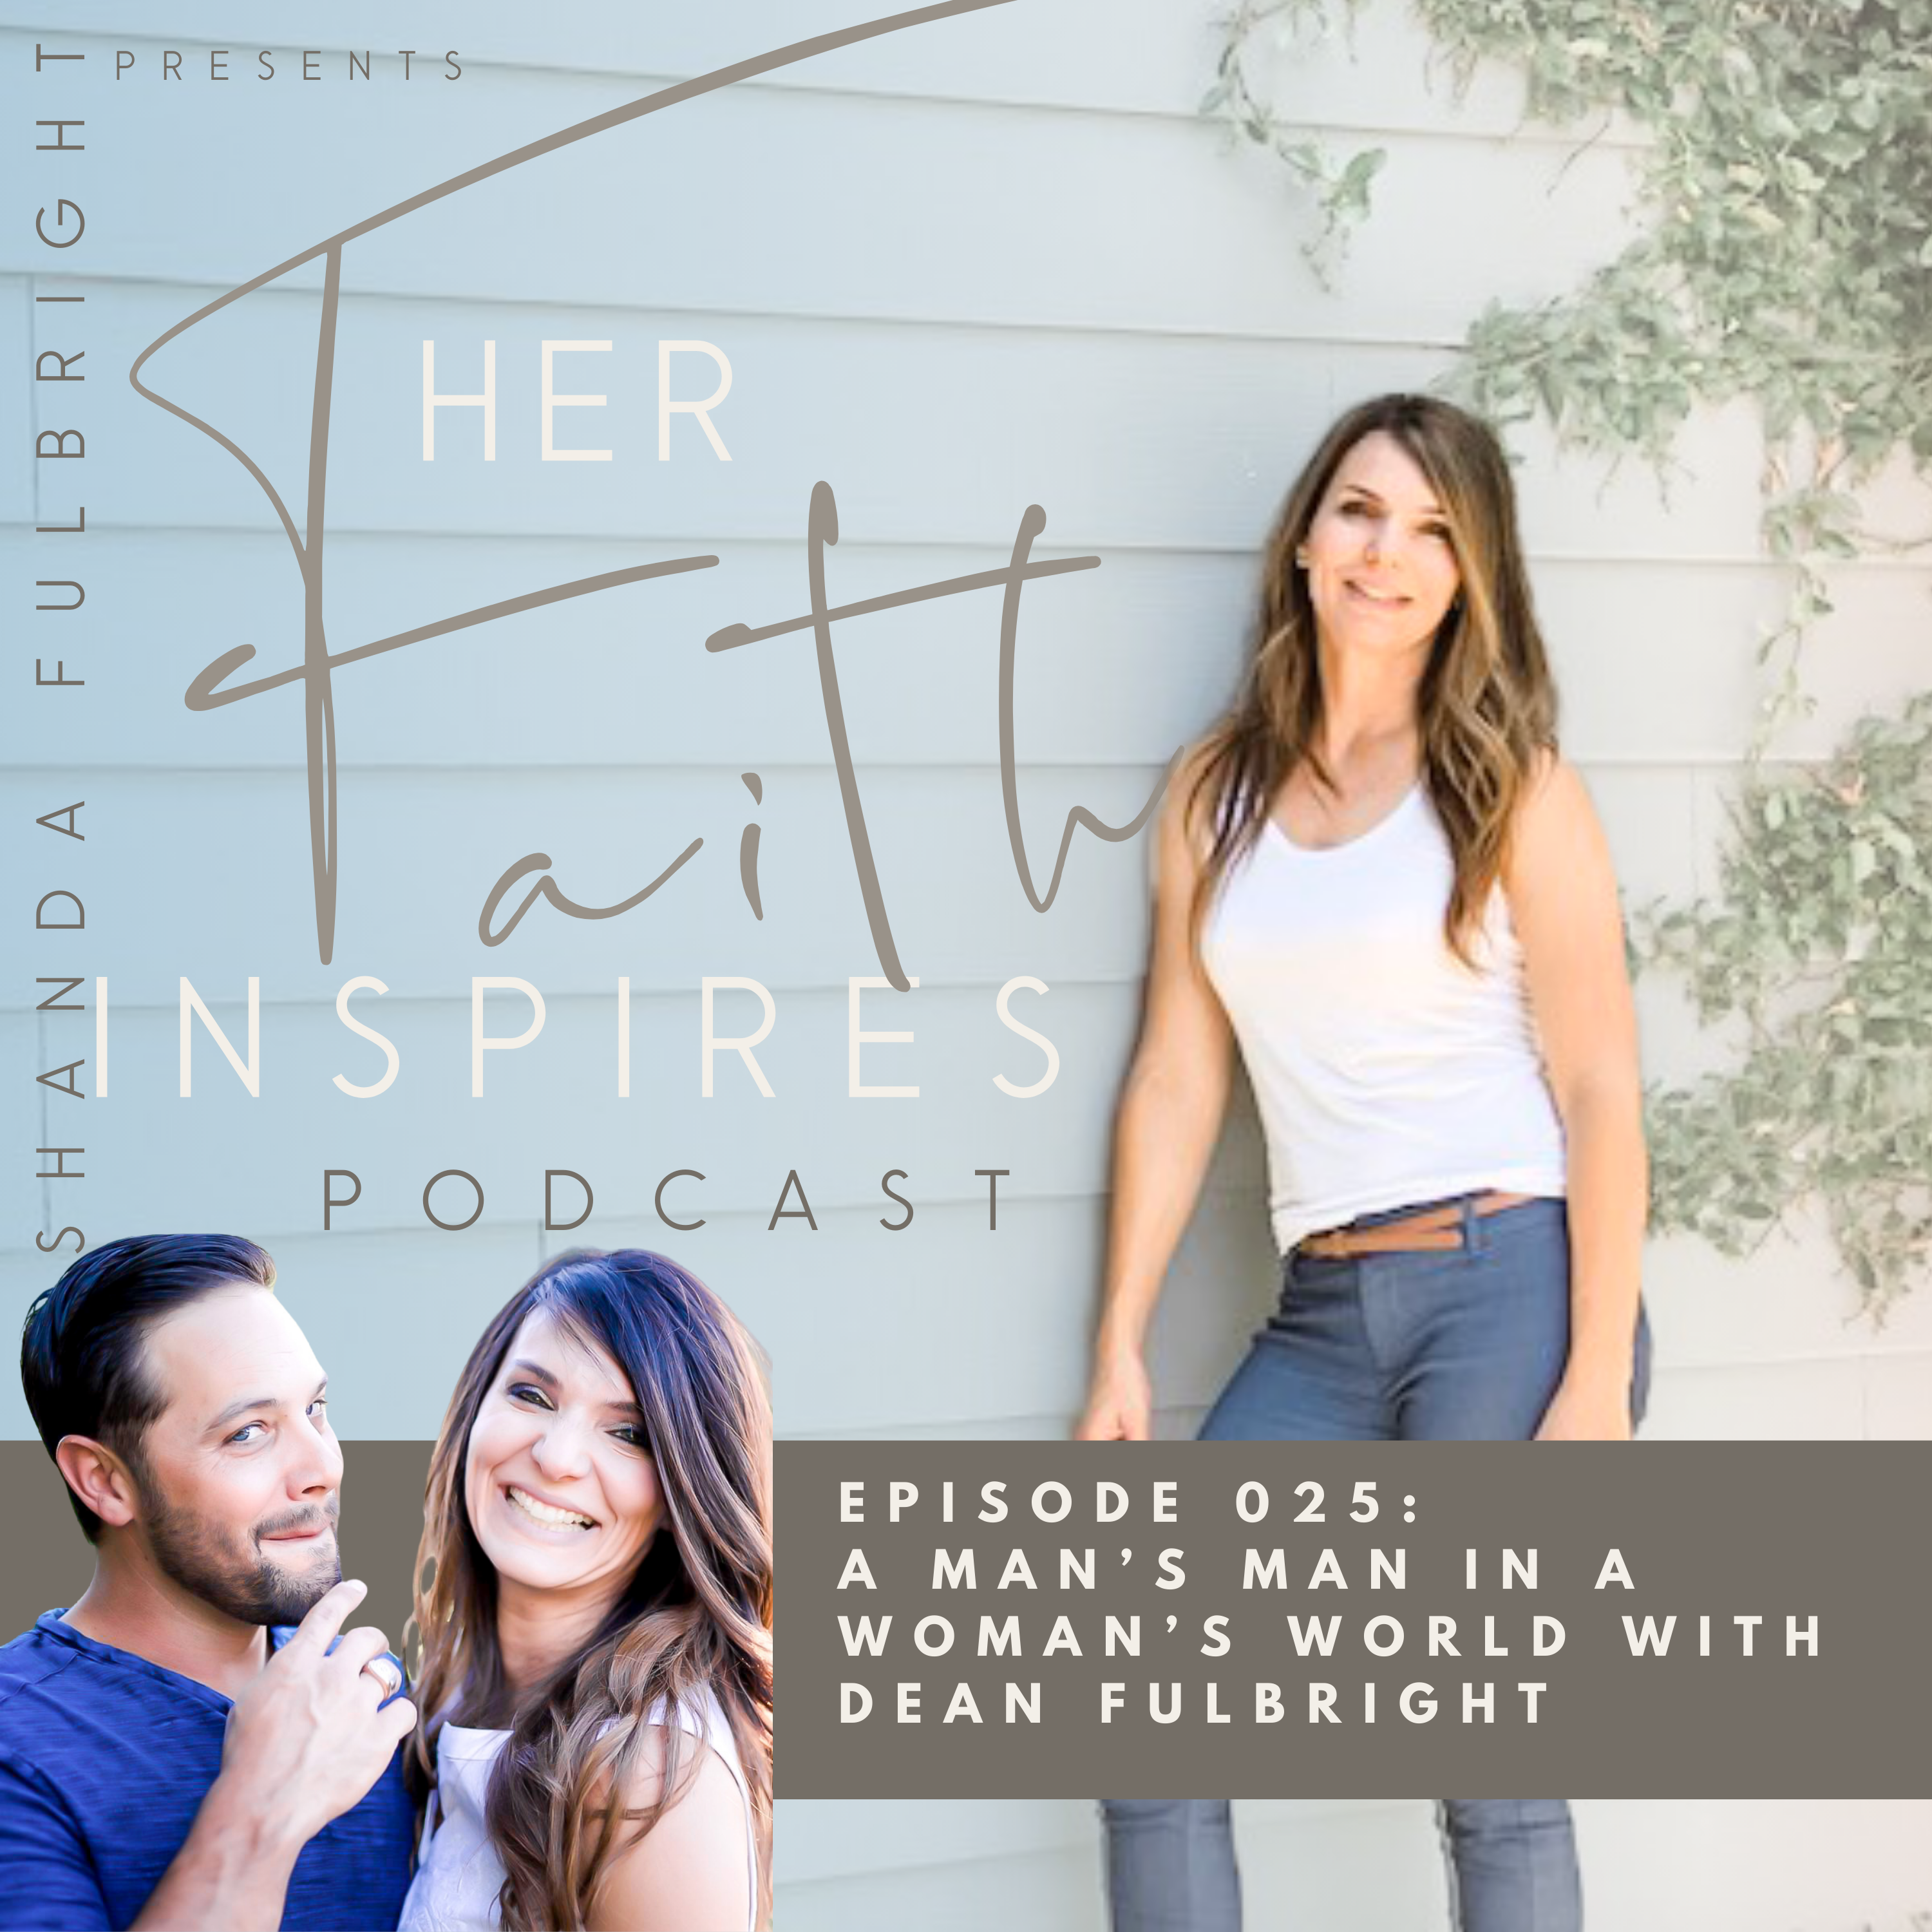 SF Podcast Episode 25 - HER FAITH INSPIRES 025 : A Man’s Man In A Woman’s World with Dean Fulbright